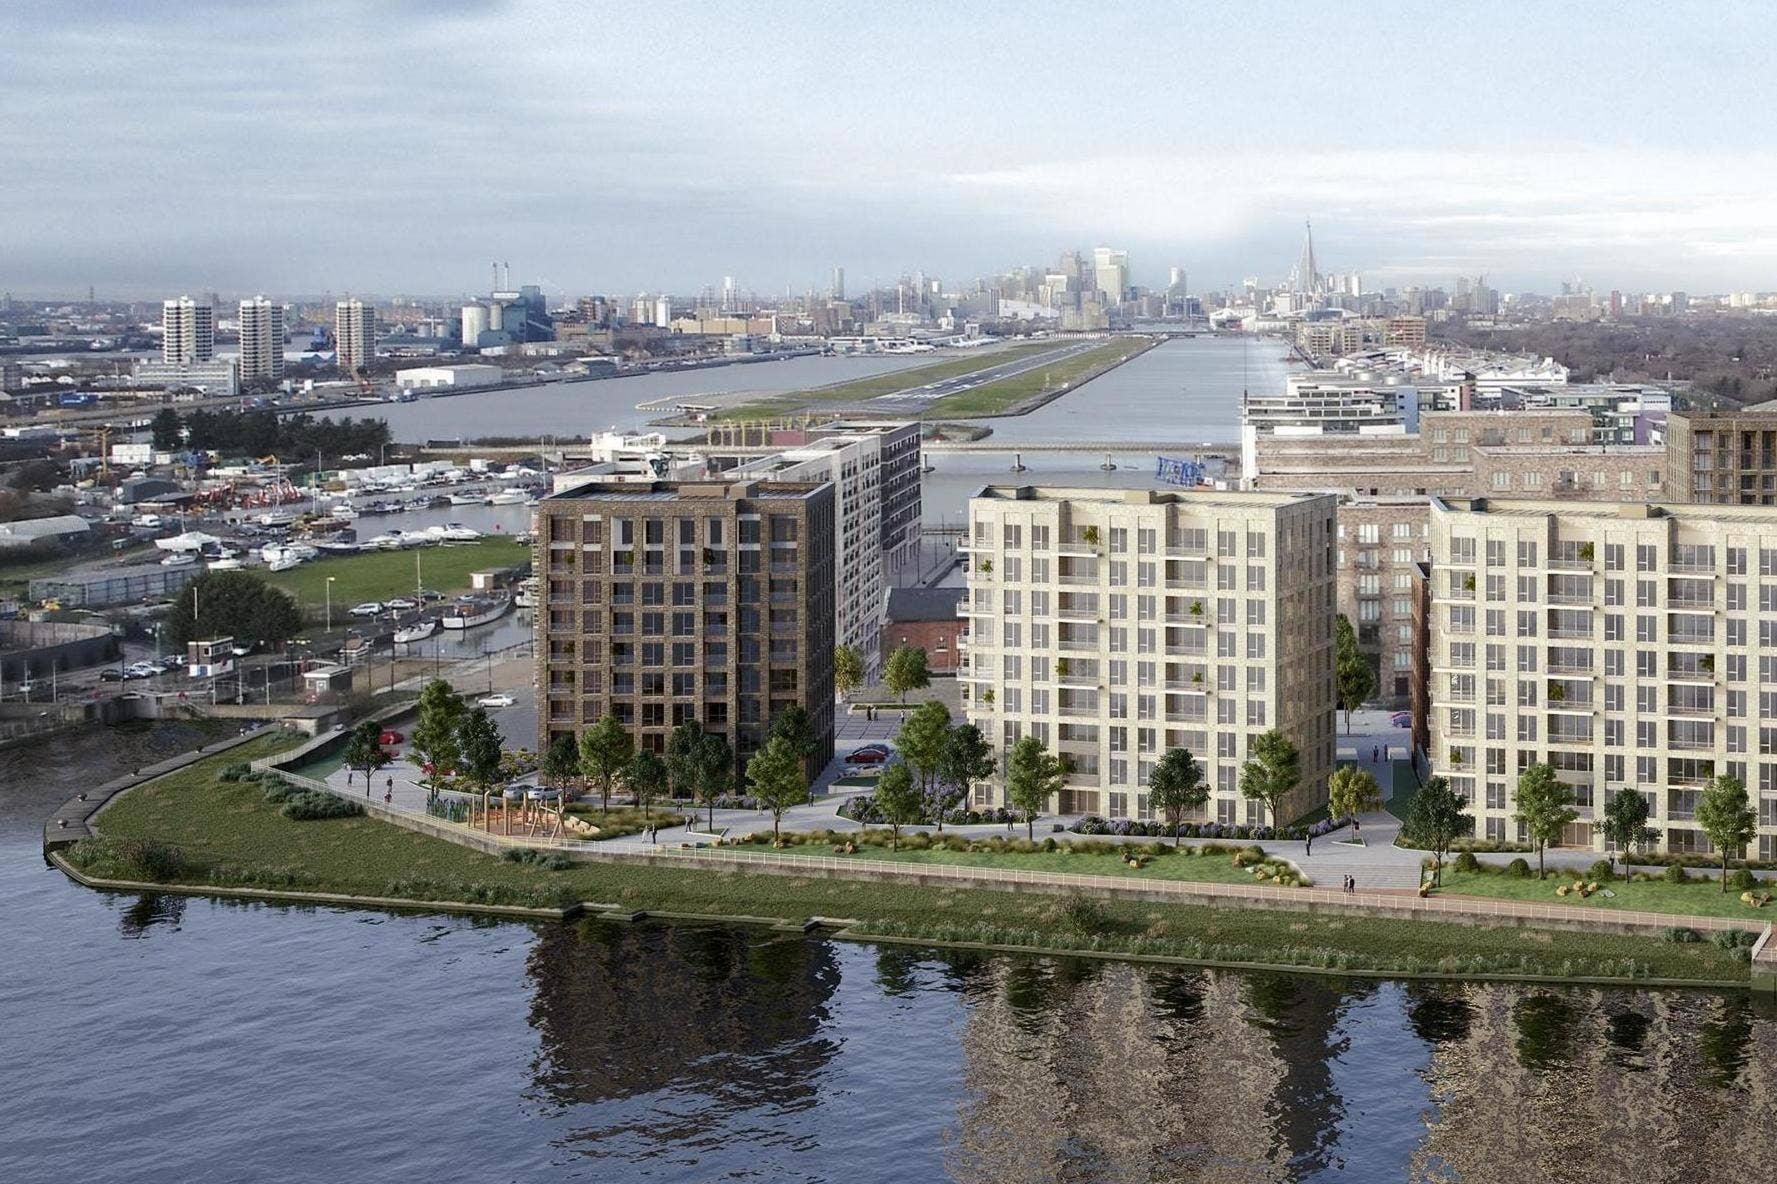 London’s second city centre, rising out of the Royal Docks, is set to become the heartland of the new East End within a decade